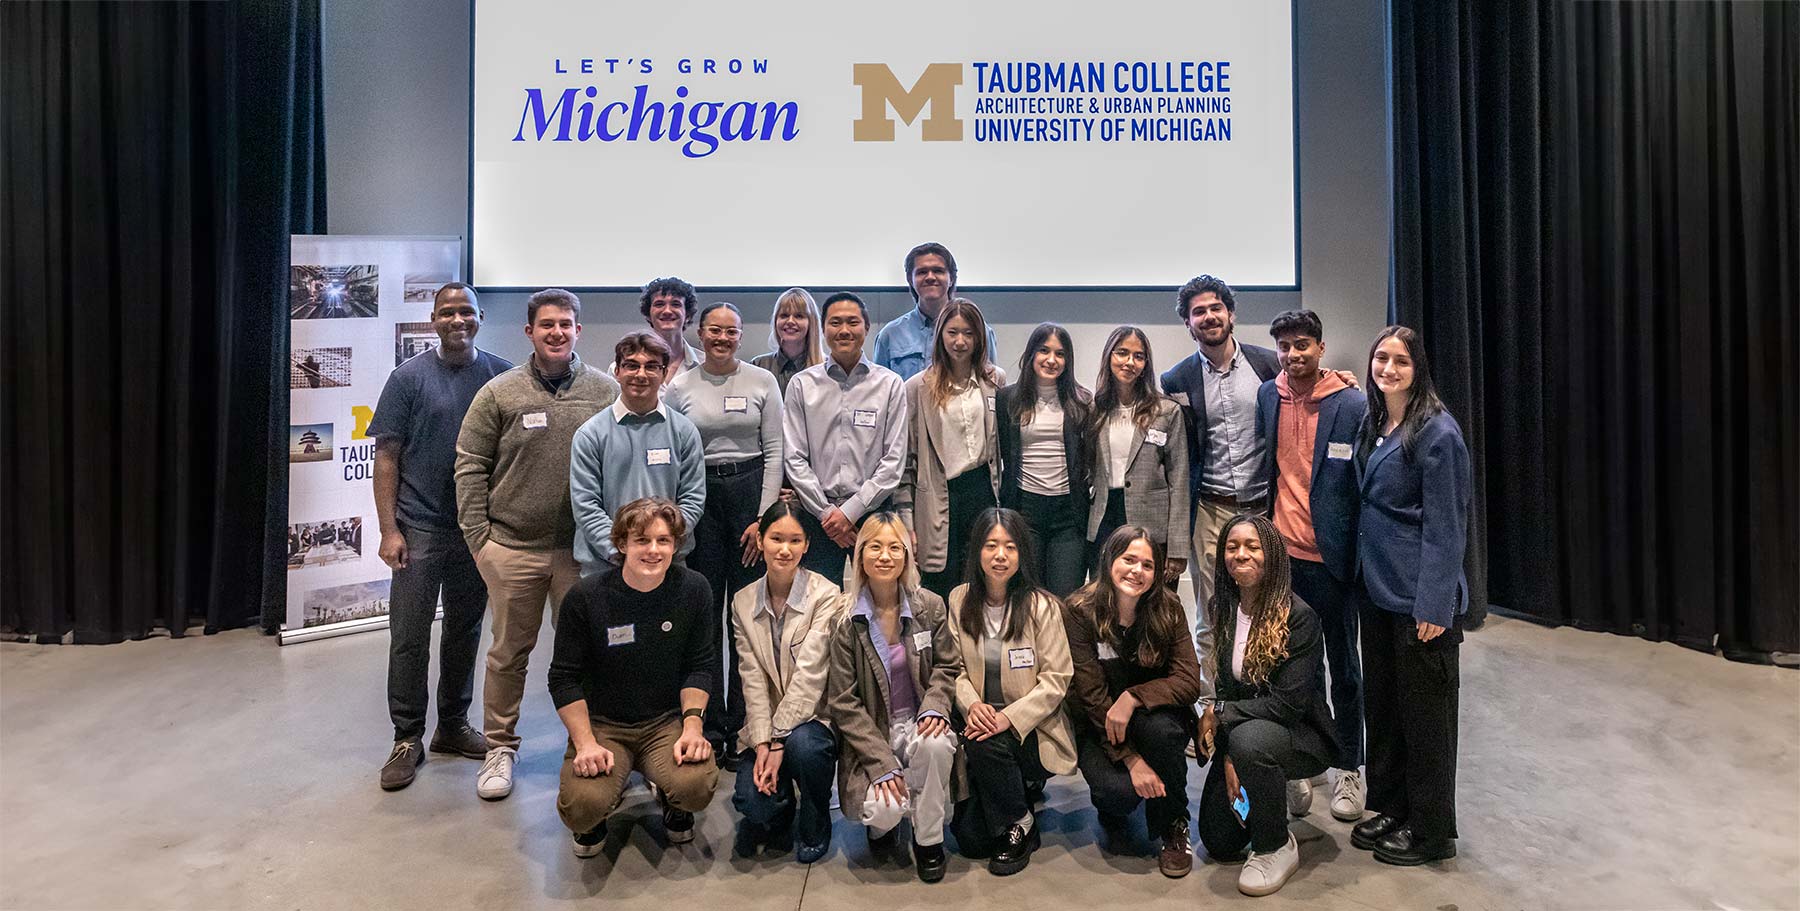 A group photo of Urban Technology students that presented at the Let’s Grow Michigan consulting project